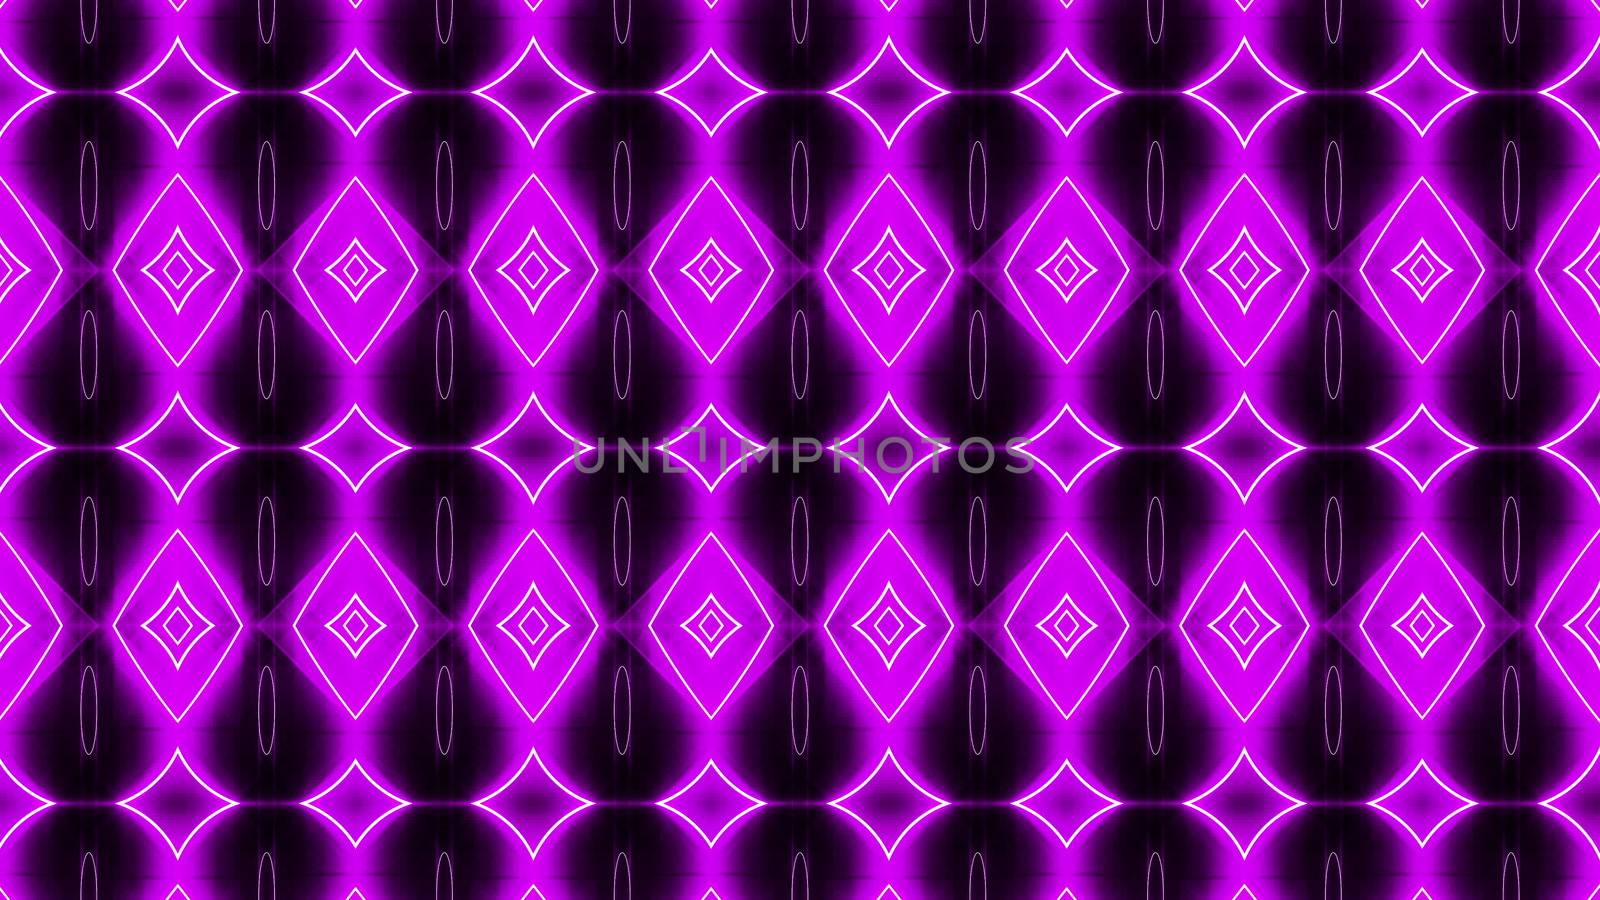 Purple abstract background, kaleidoscope. 3D rendered backdrop